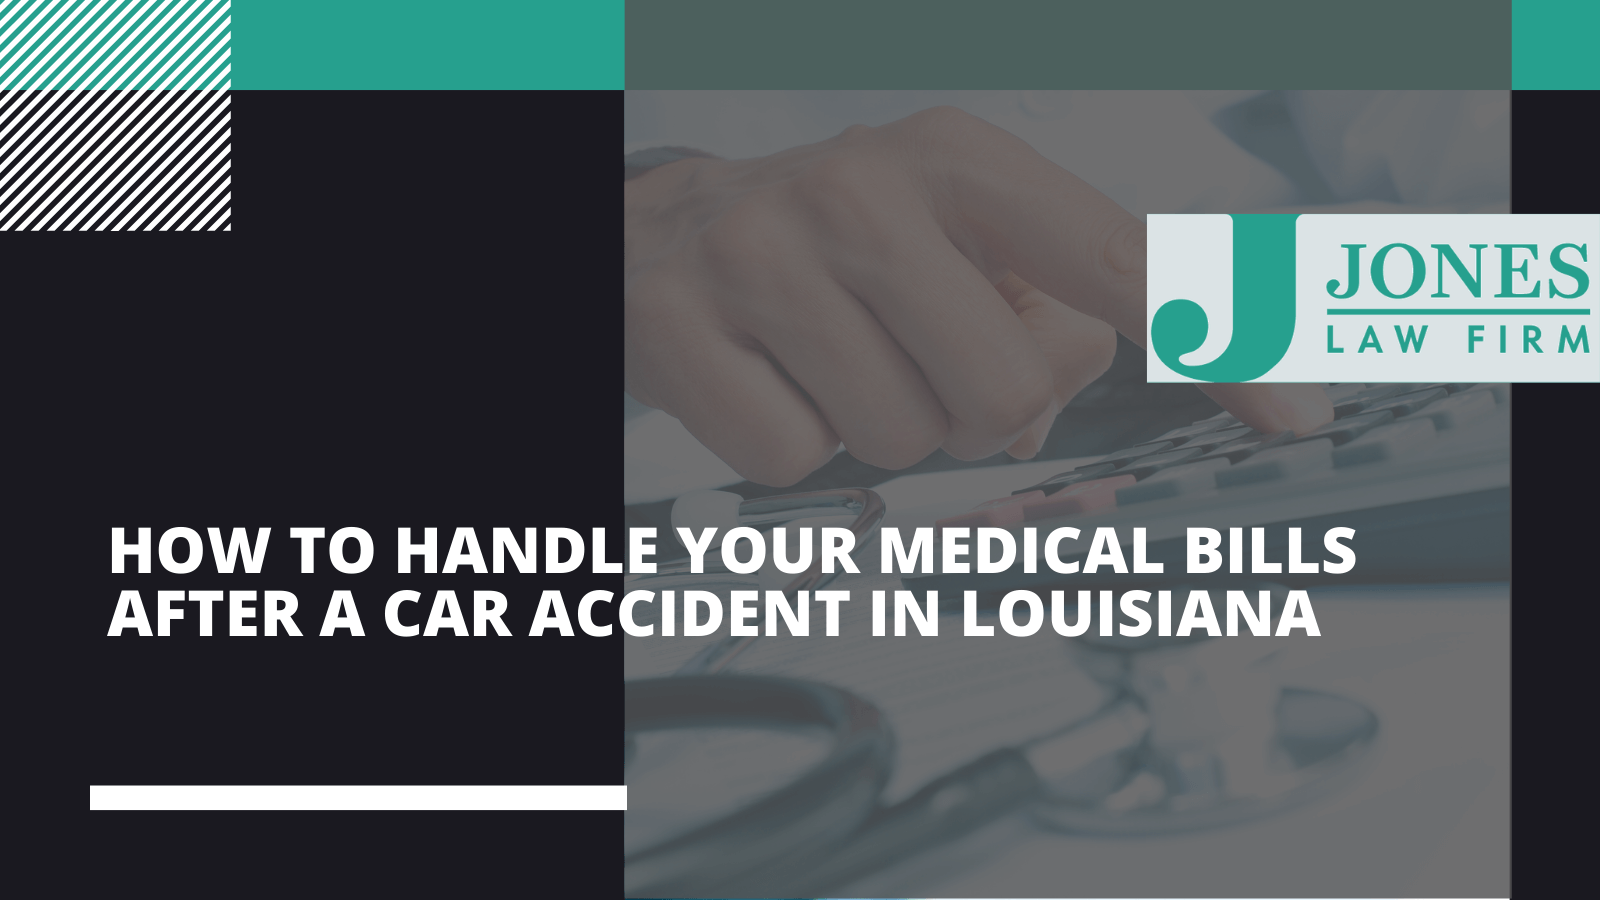 How to handle your medical bills after a car accident in Louisiana - Jones law firm - Alexandria louisiana